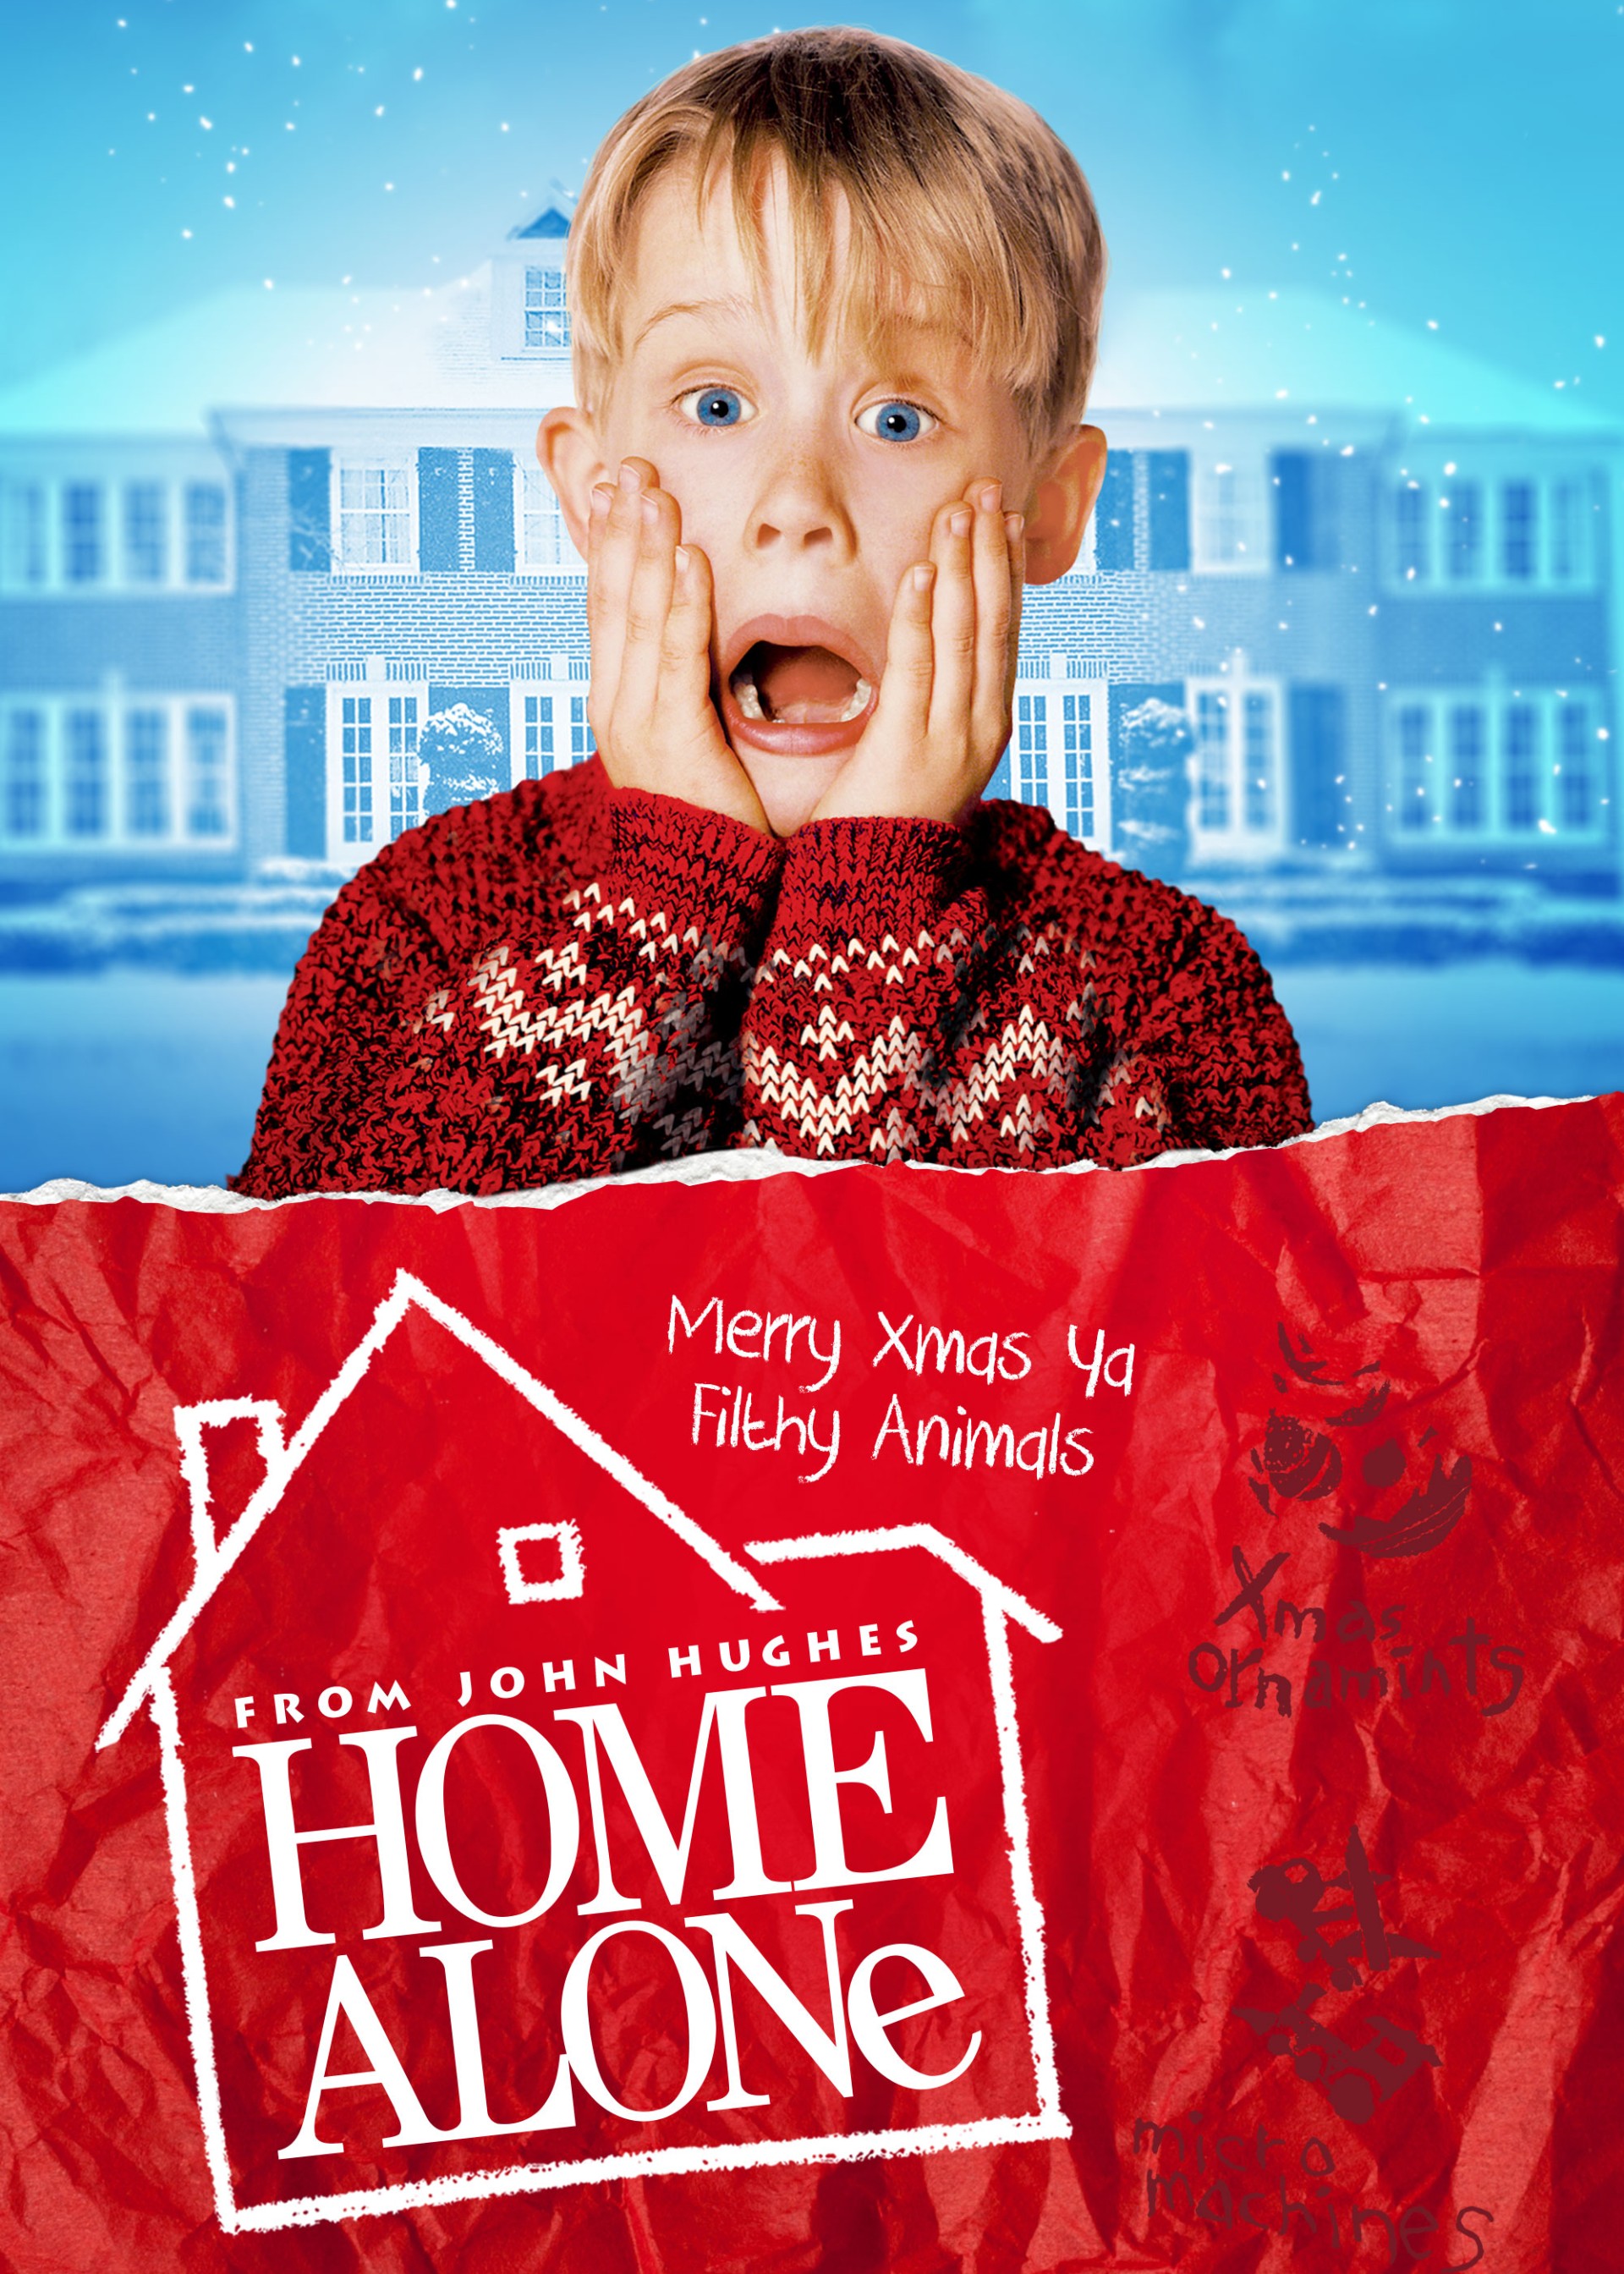 How many Home Alone movies are there?